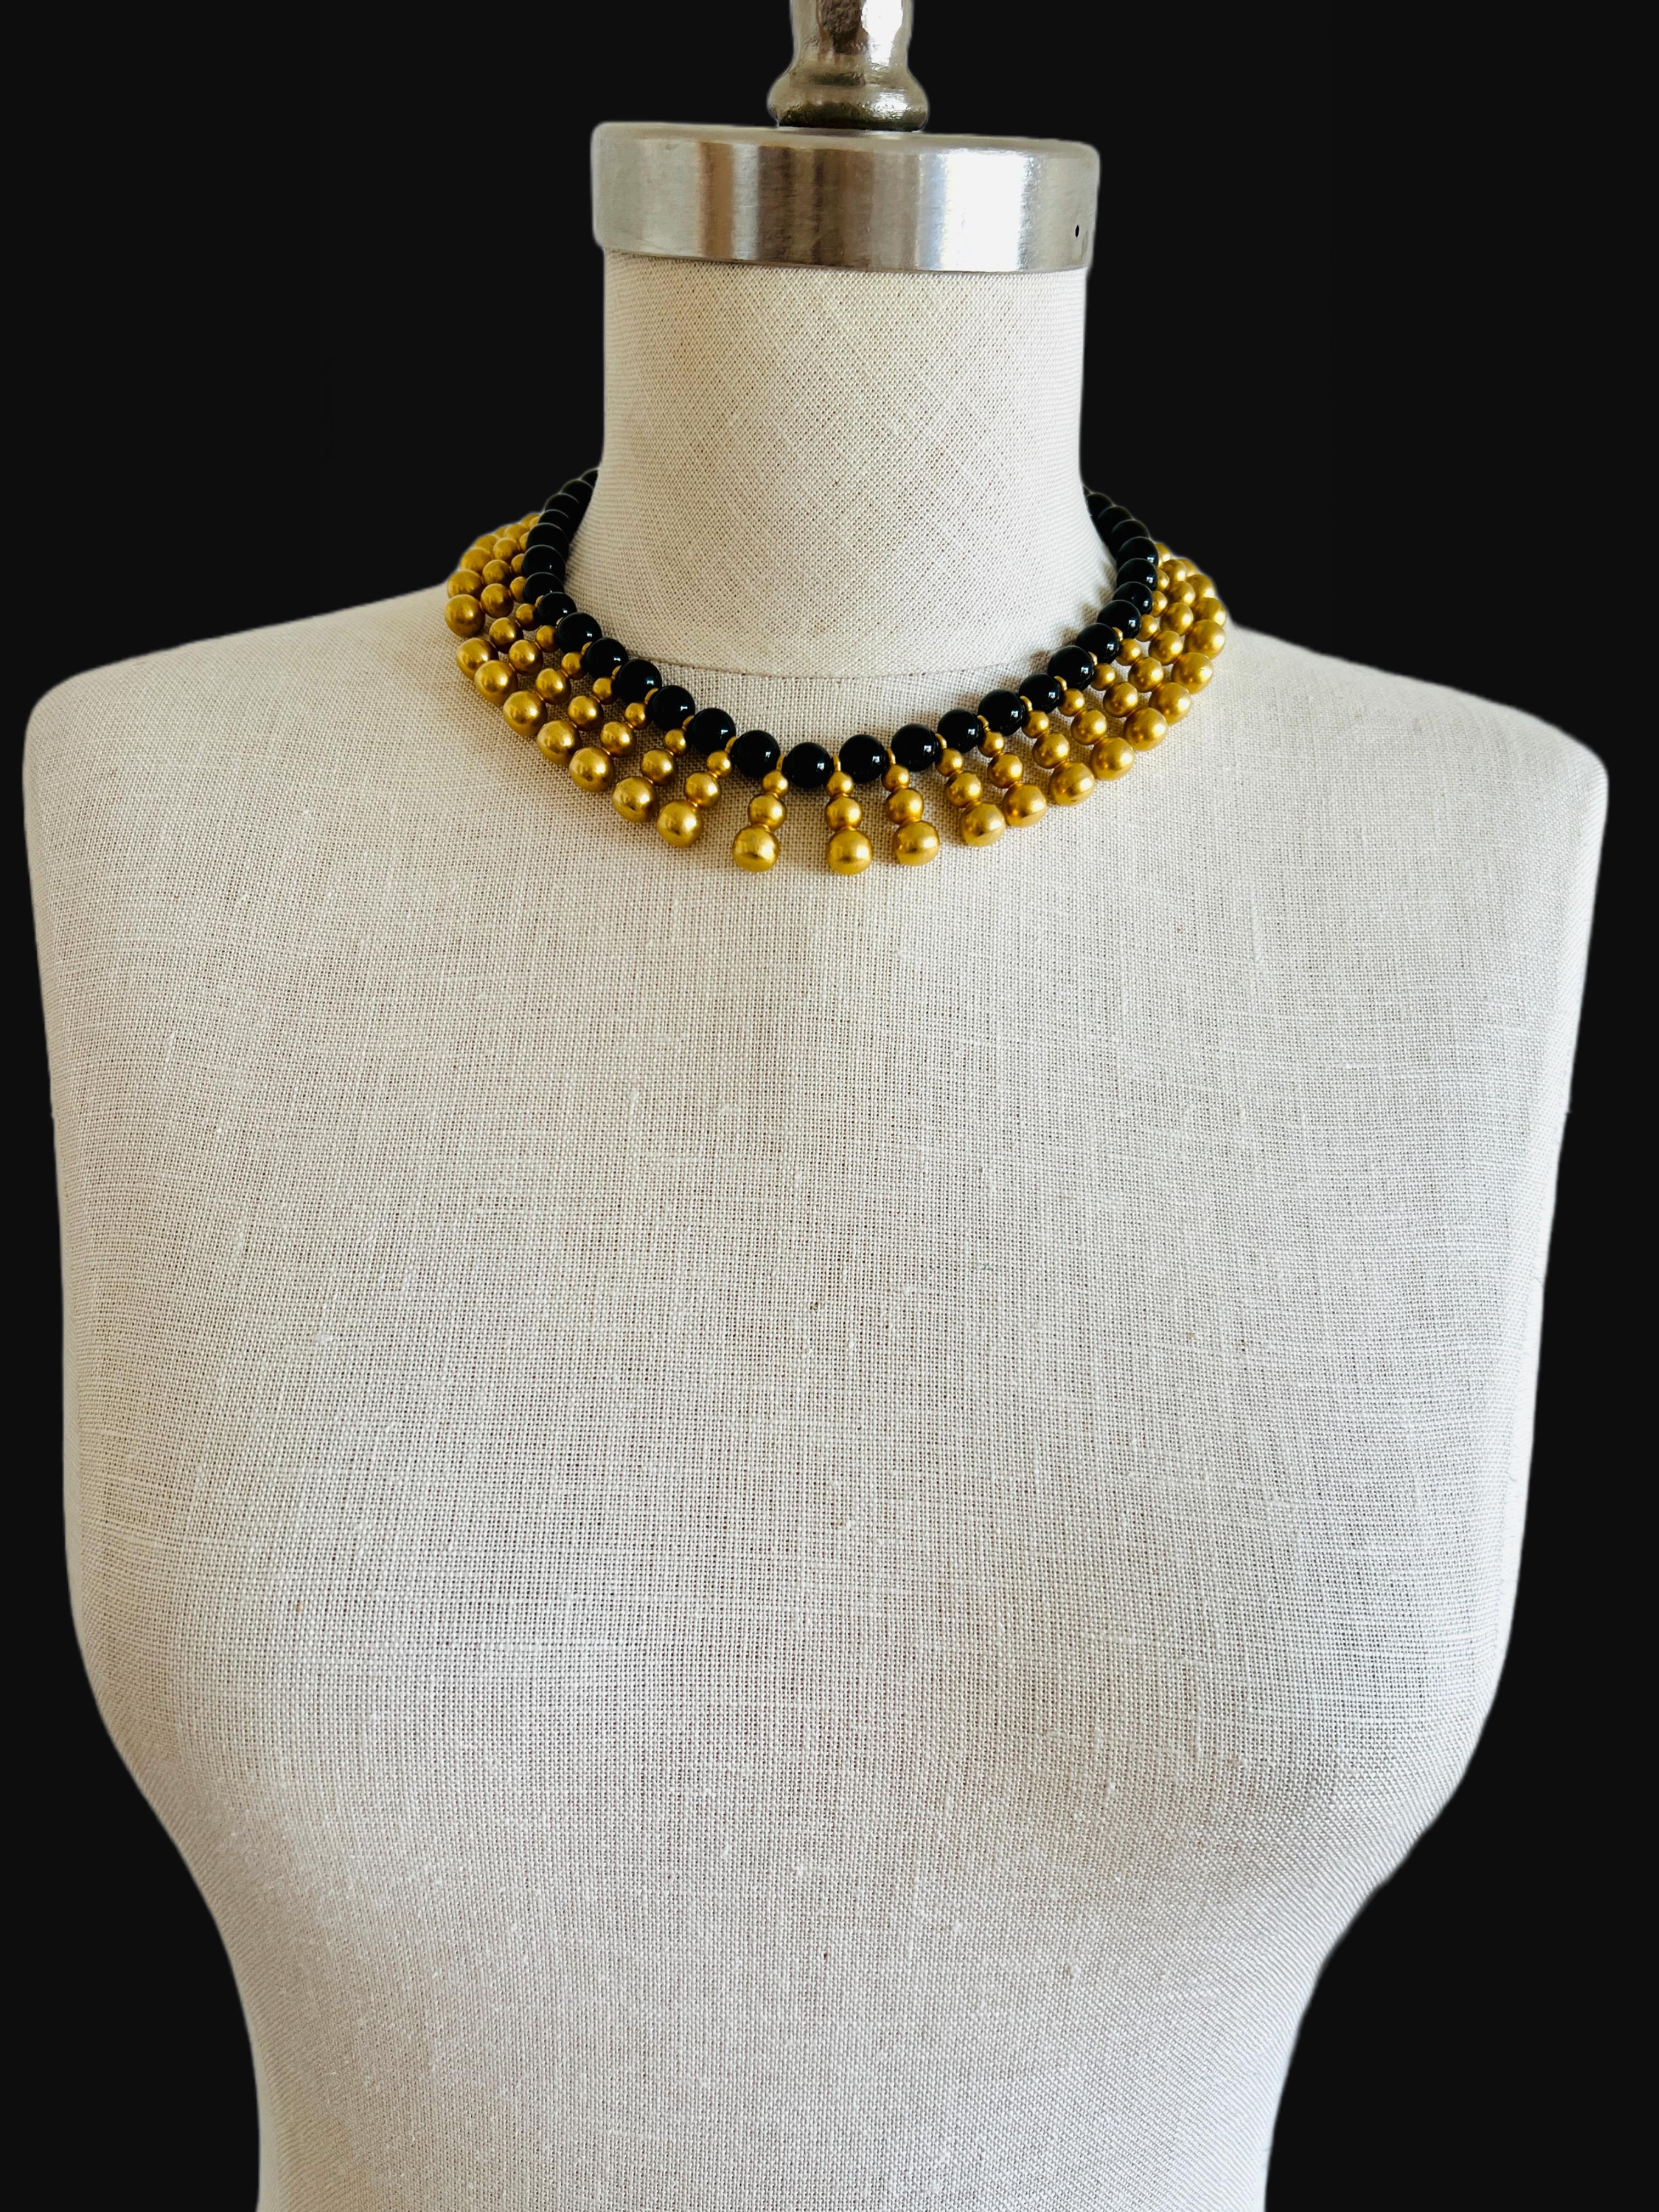 necklace with black thread